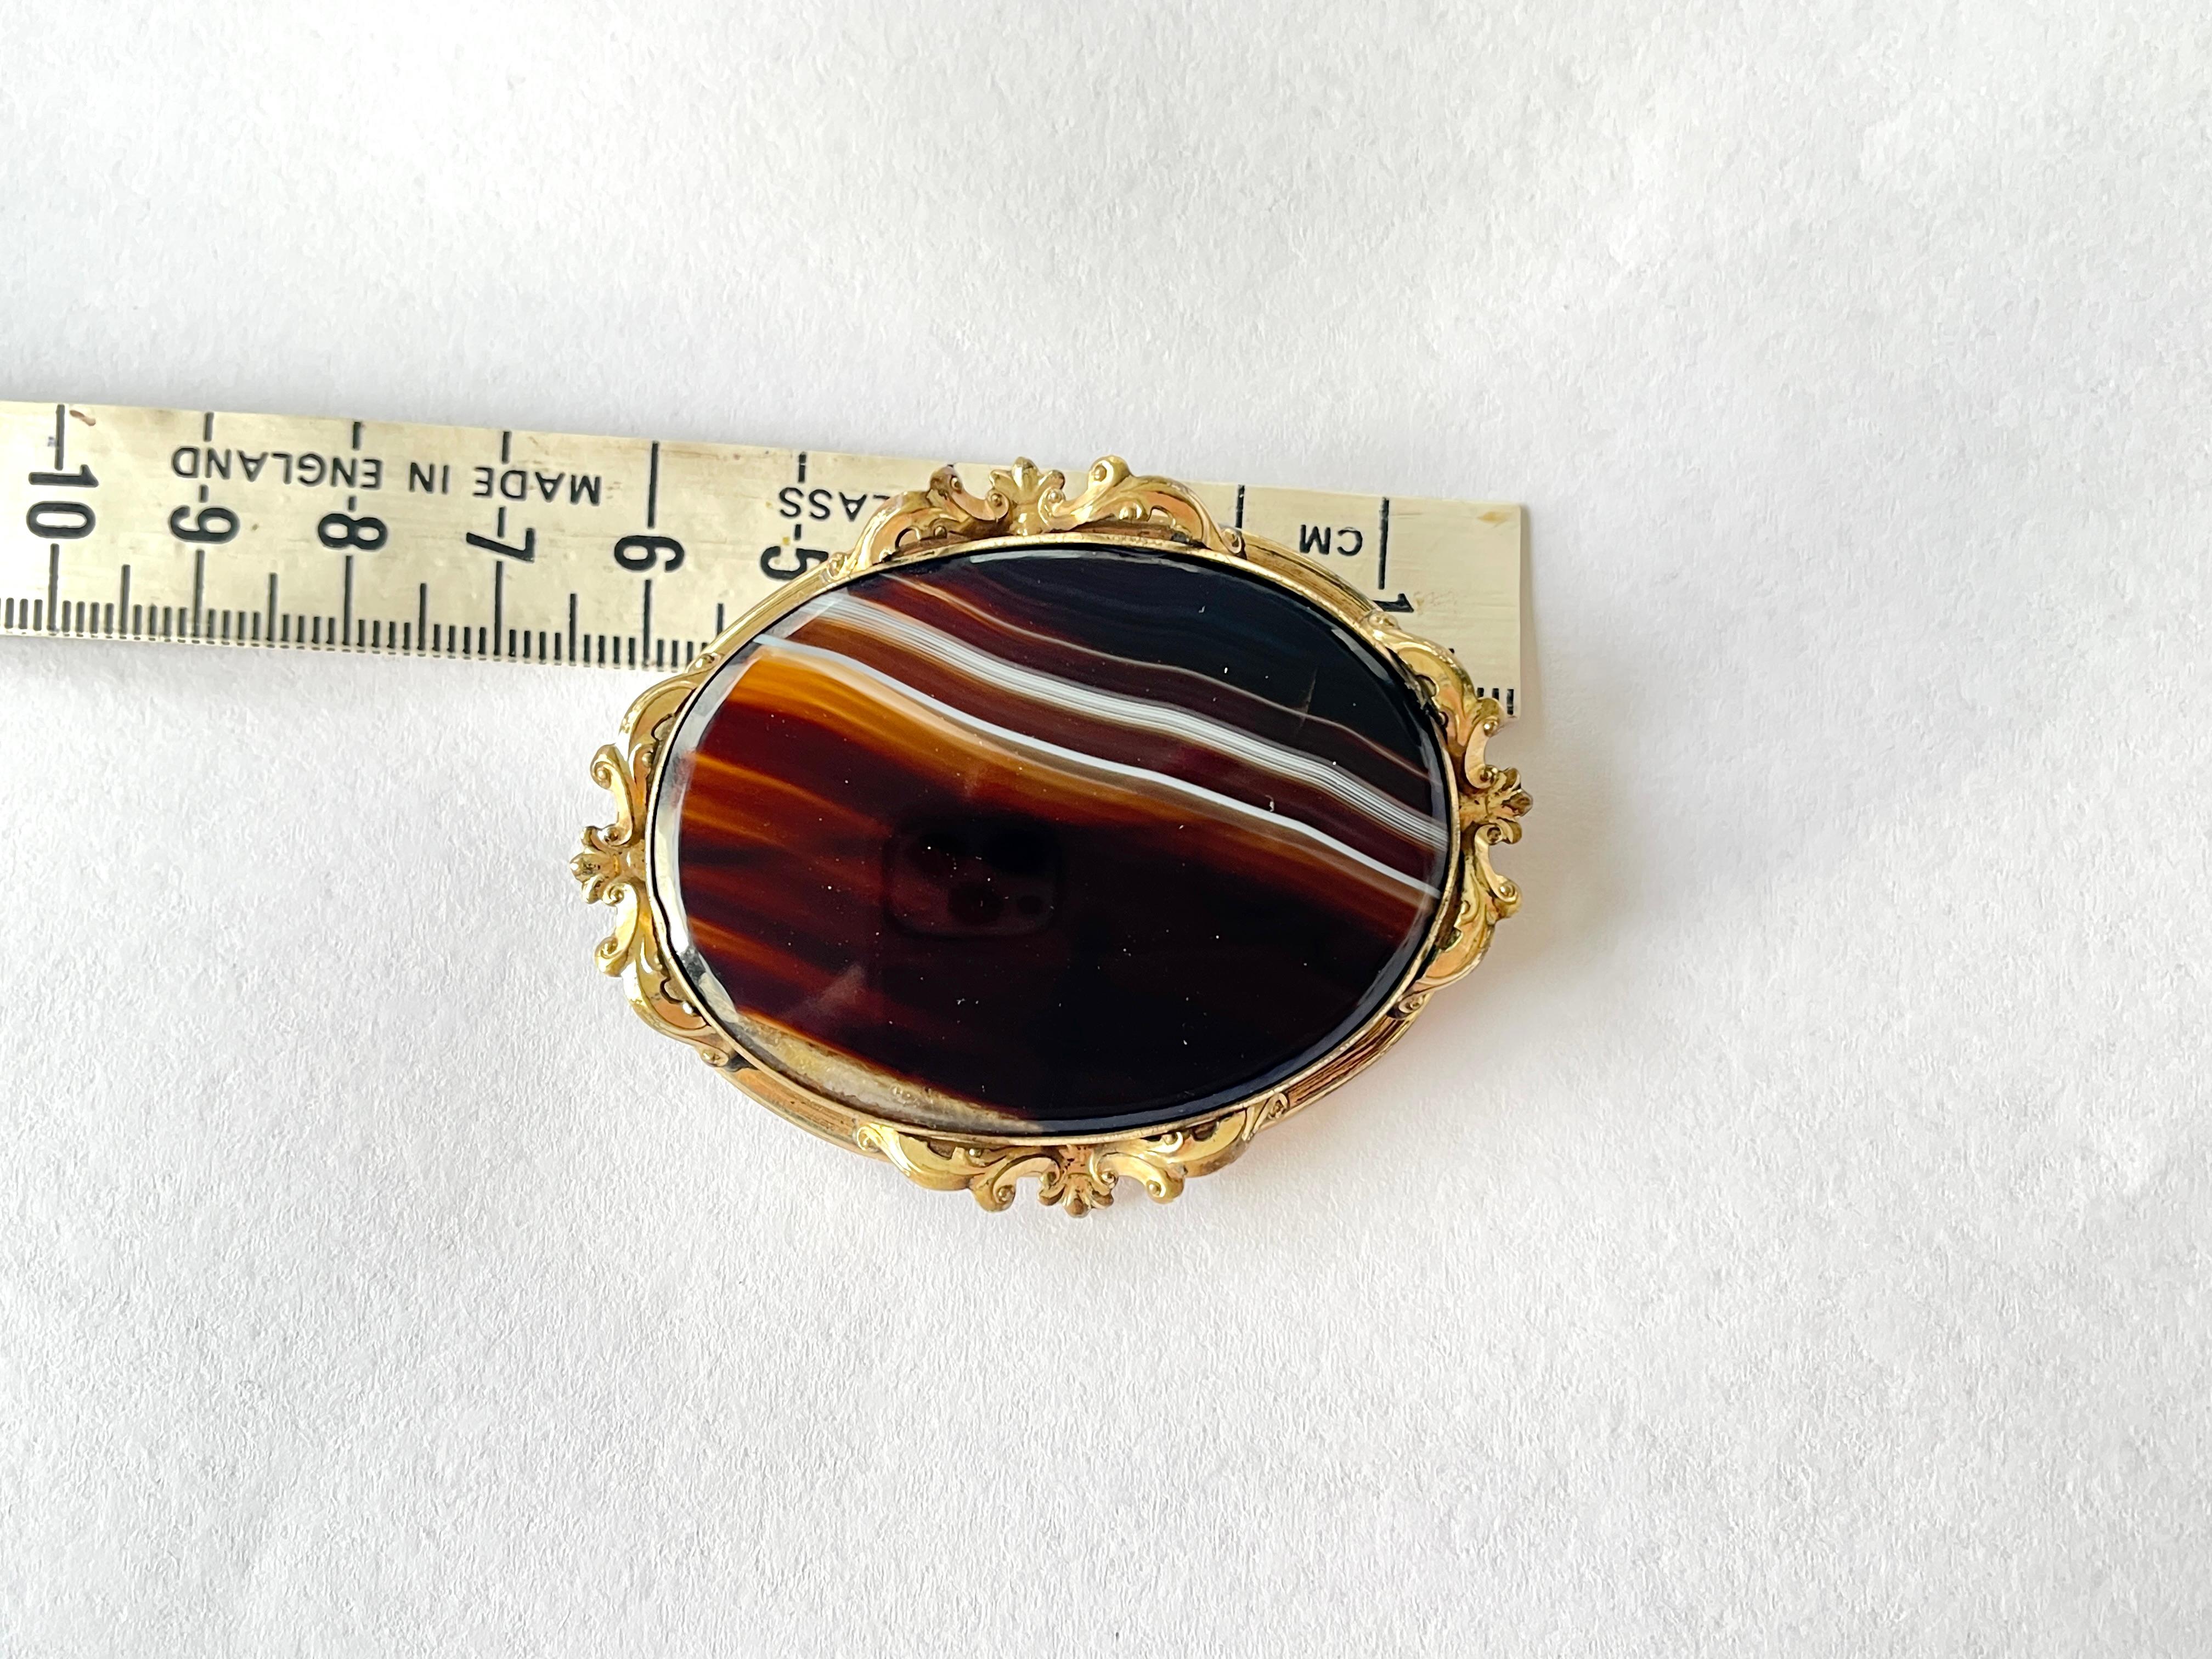 Oval Cut Large Antique Victorian Banded Agate Brooch c1890s Gold Gilt Good Condition For Sale